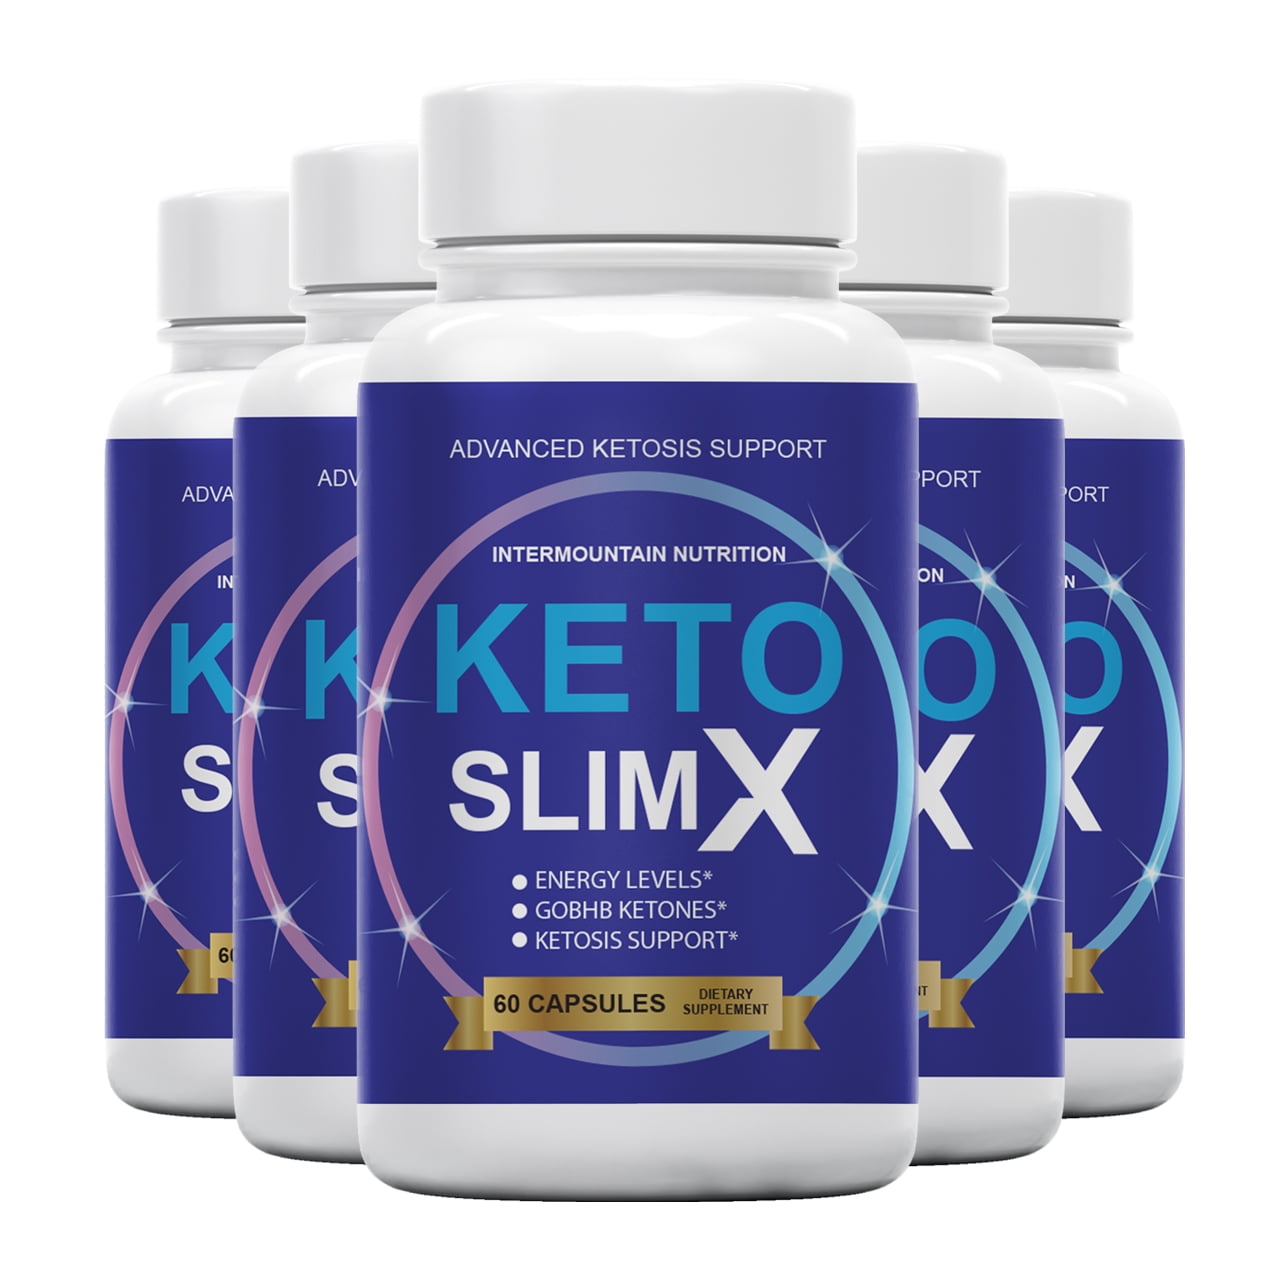 Keto Diet Pills and Supplement Hurt Your Health and Waste Your Money